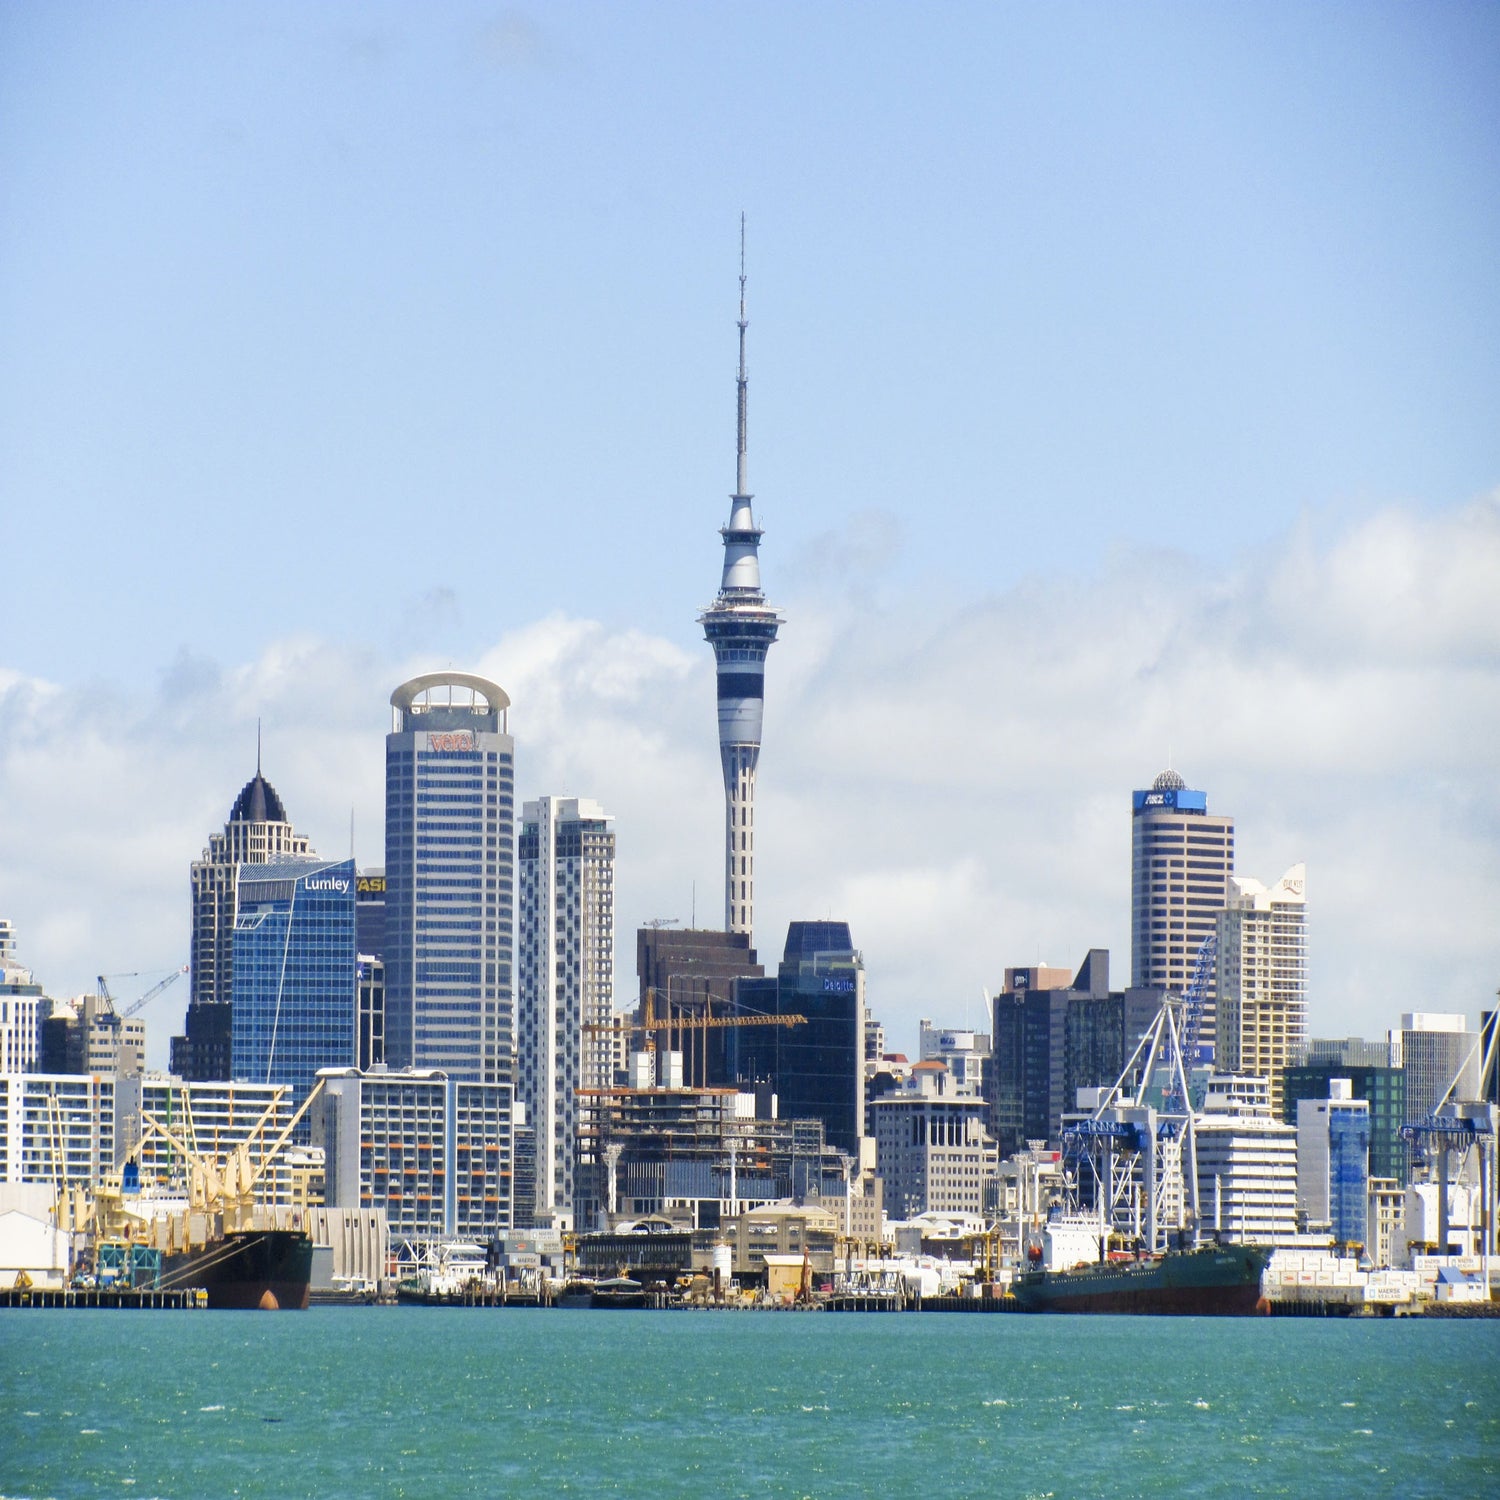 Auckland - Coming Soon!